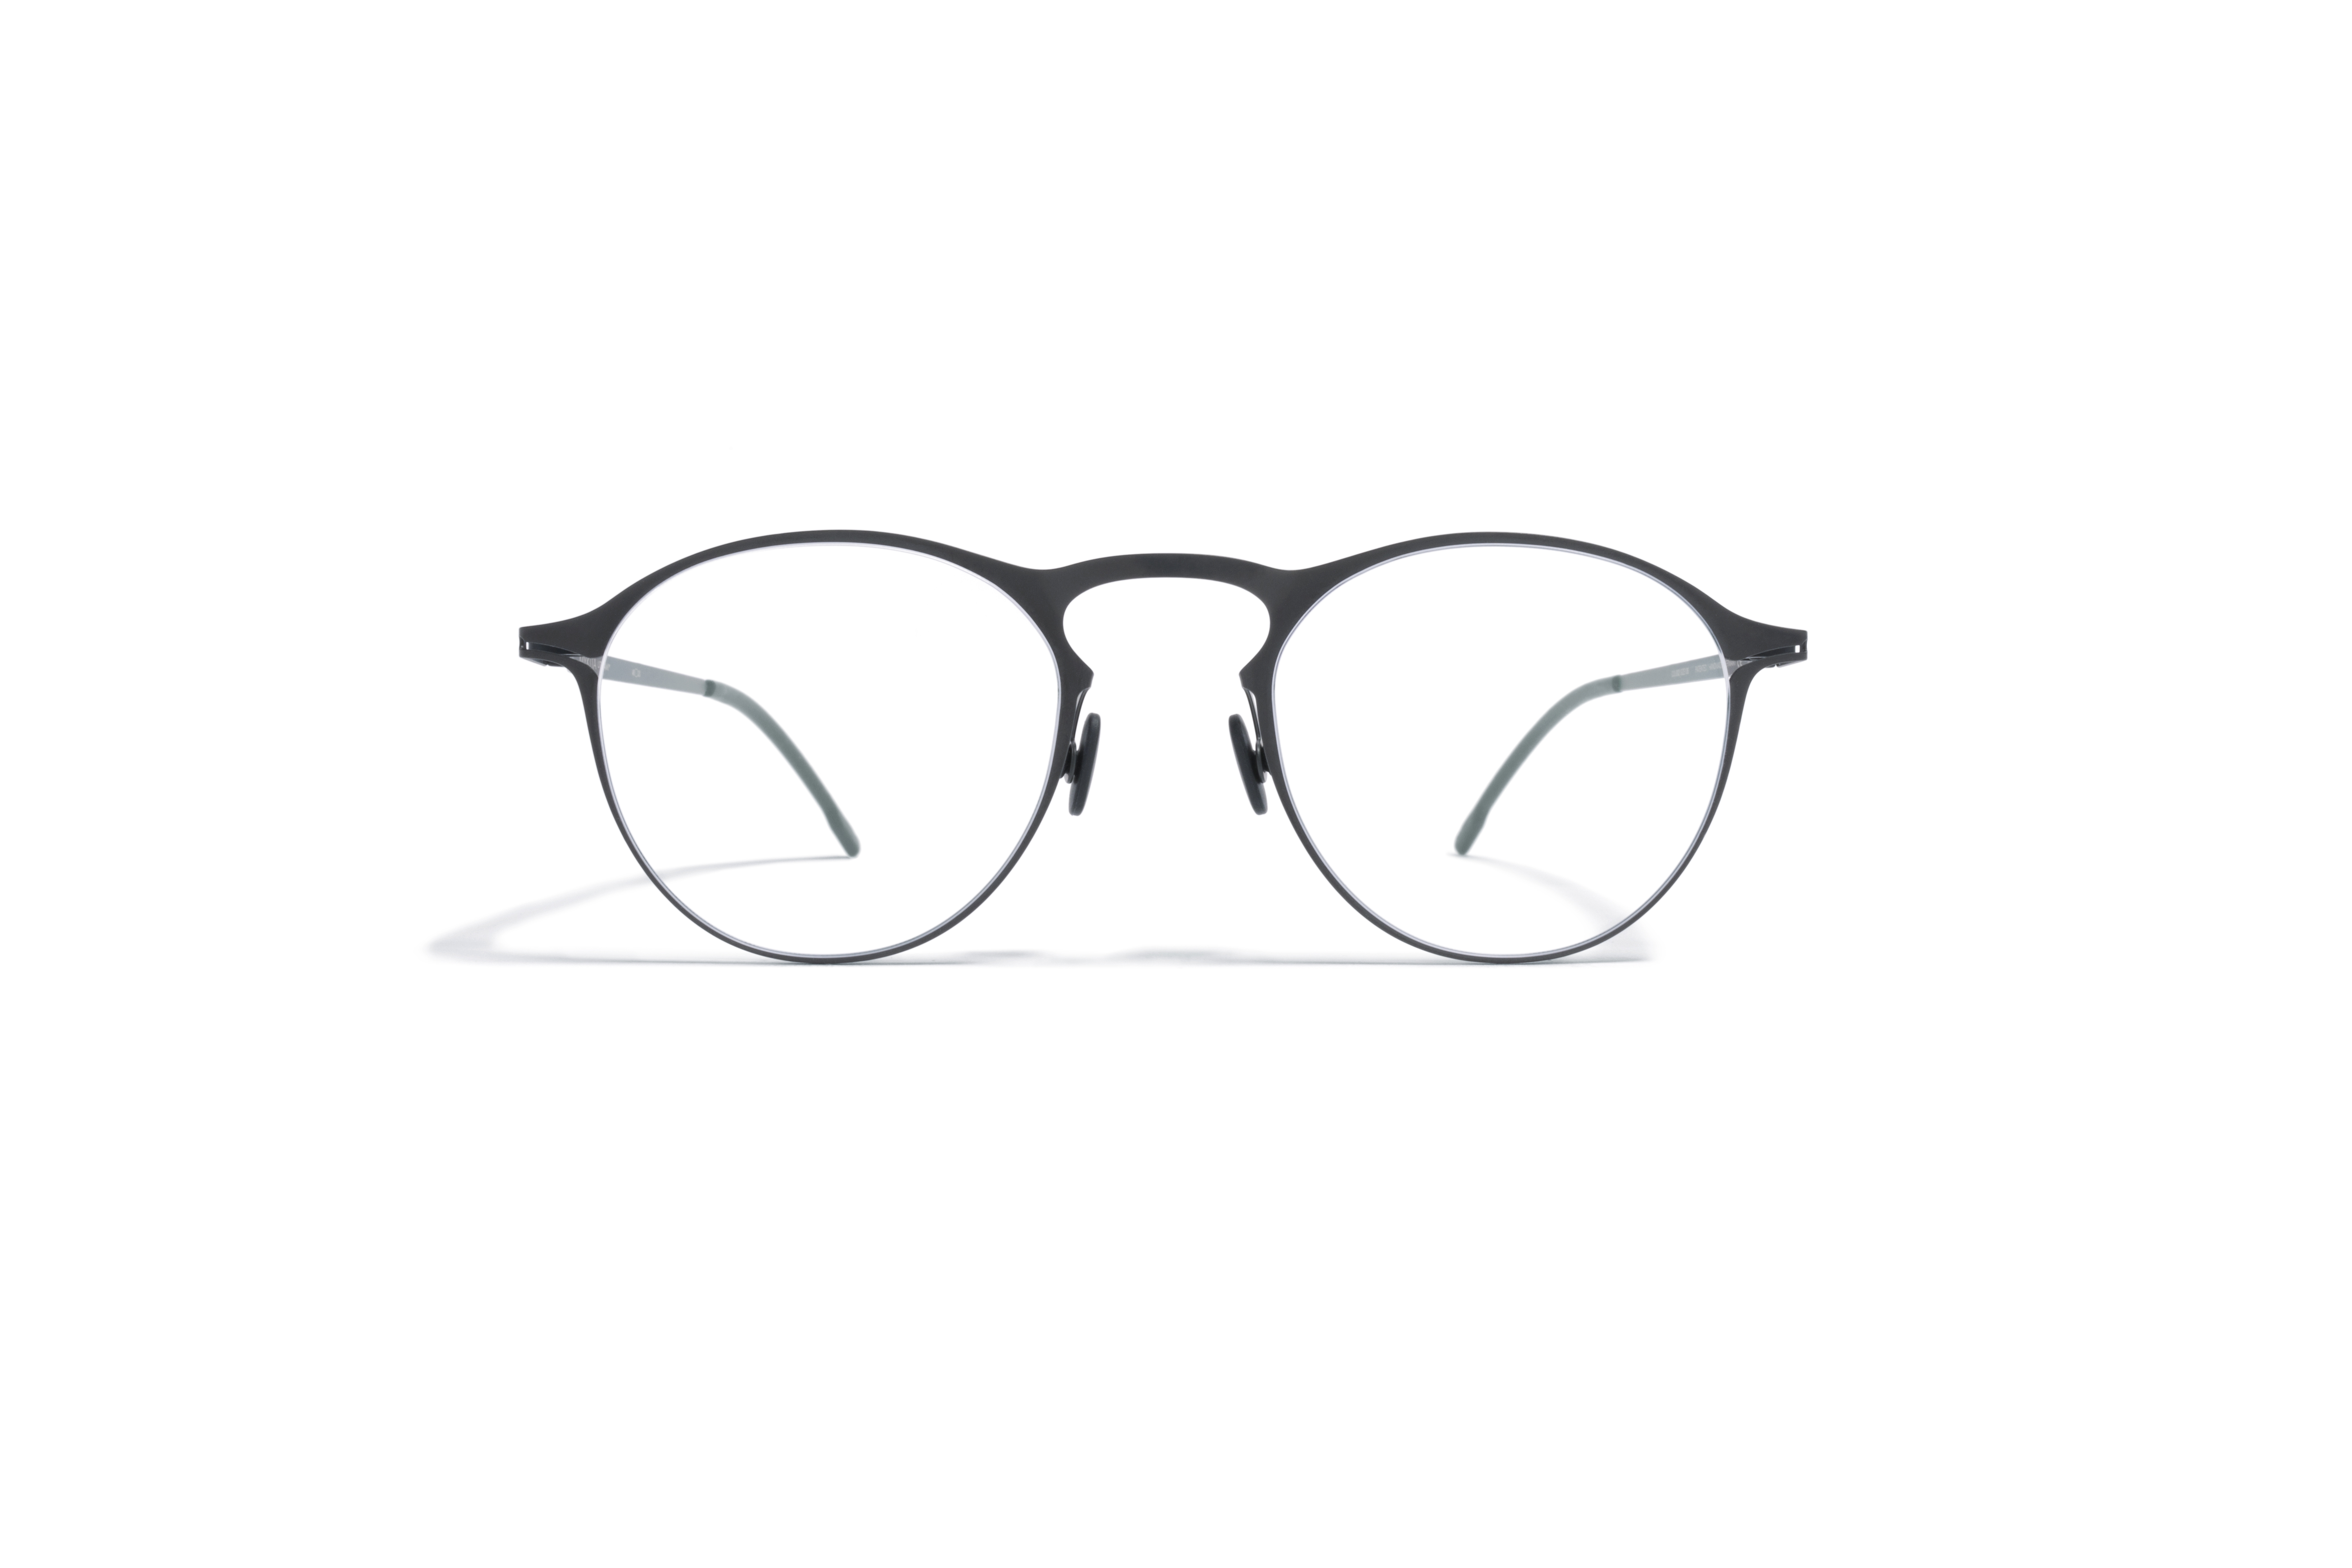 MYKITA - UNFORTUNATELY THIS PRODUCT IS NO LONGER AVAILABLE